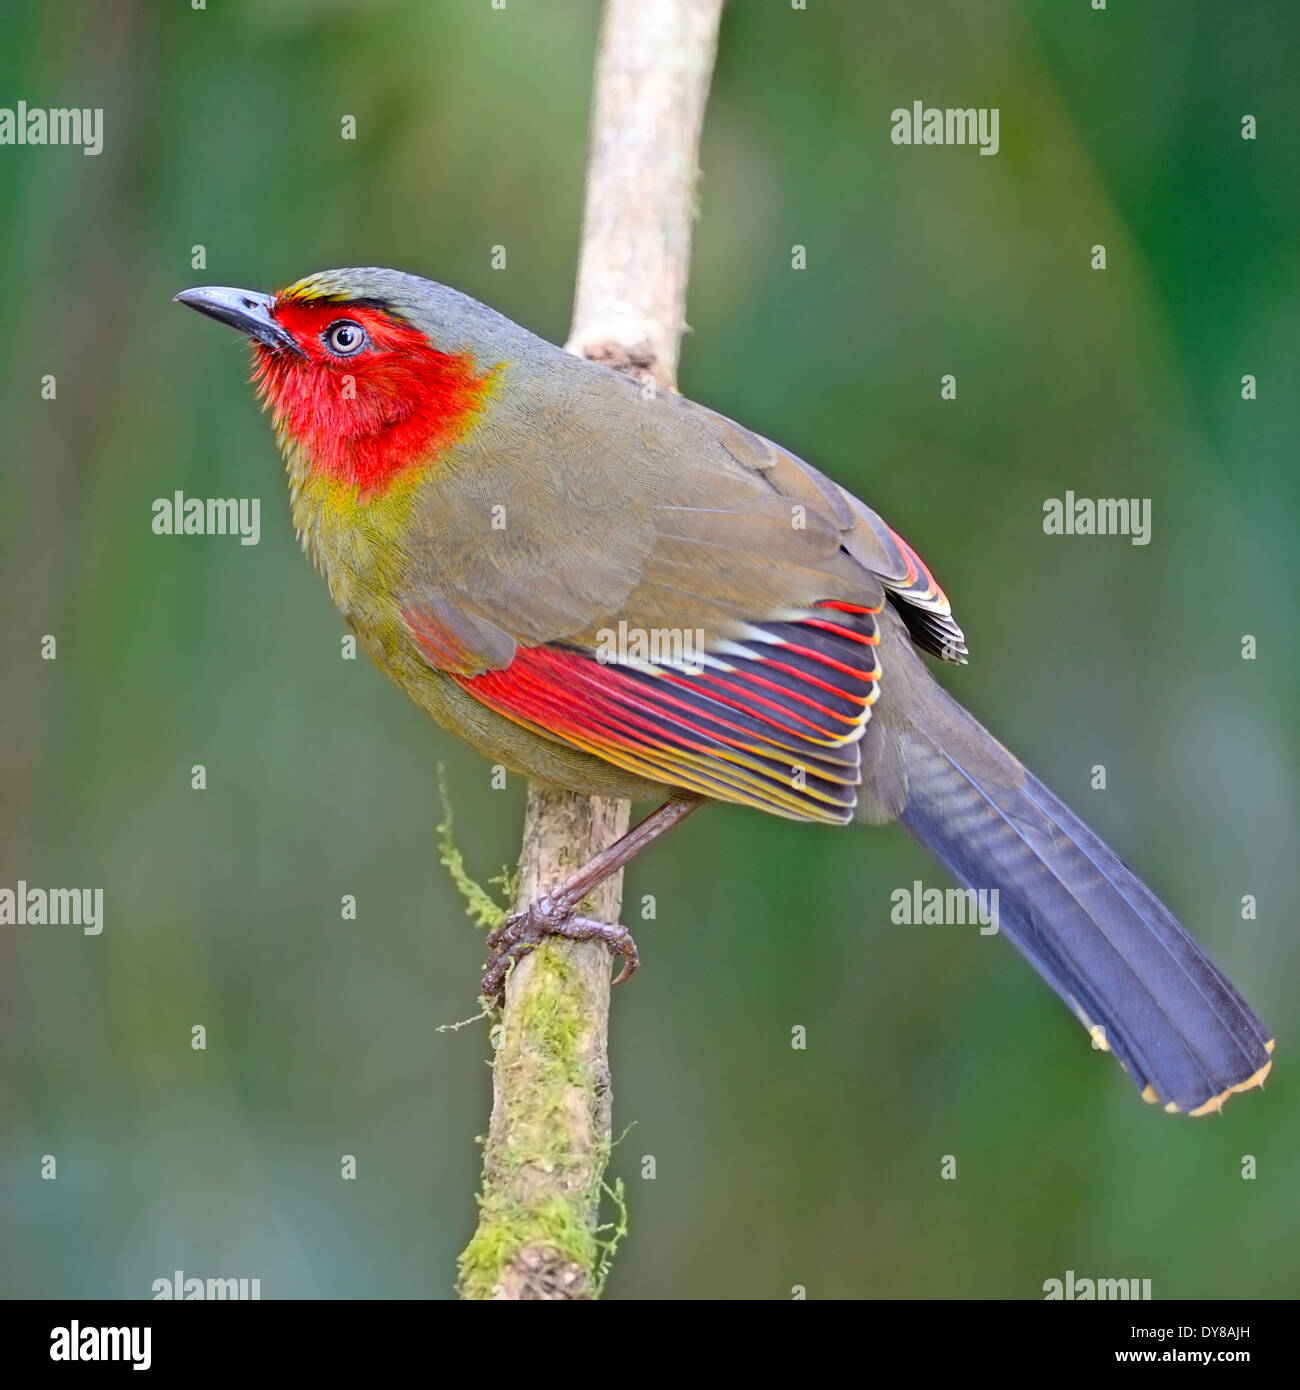 Colorful red-faced bird, Scarlet-faced Liocichla (Liocichla ripponi), sitting on a branch Stock Photo